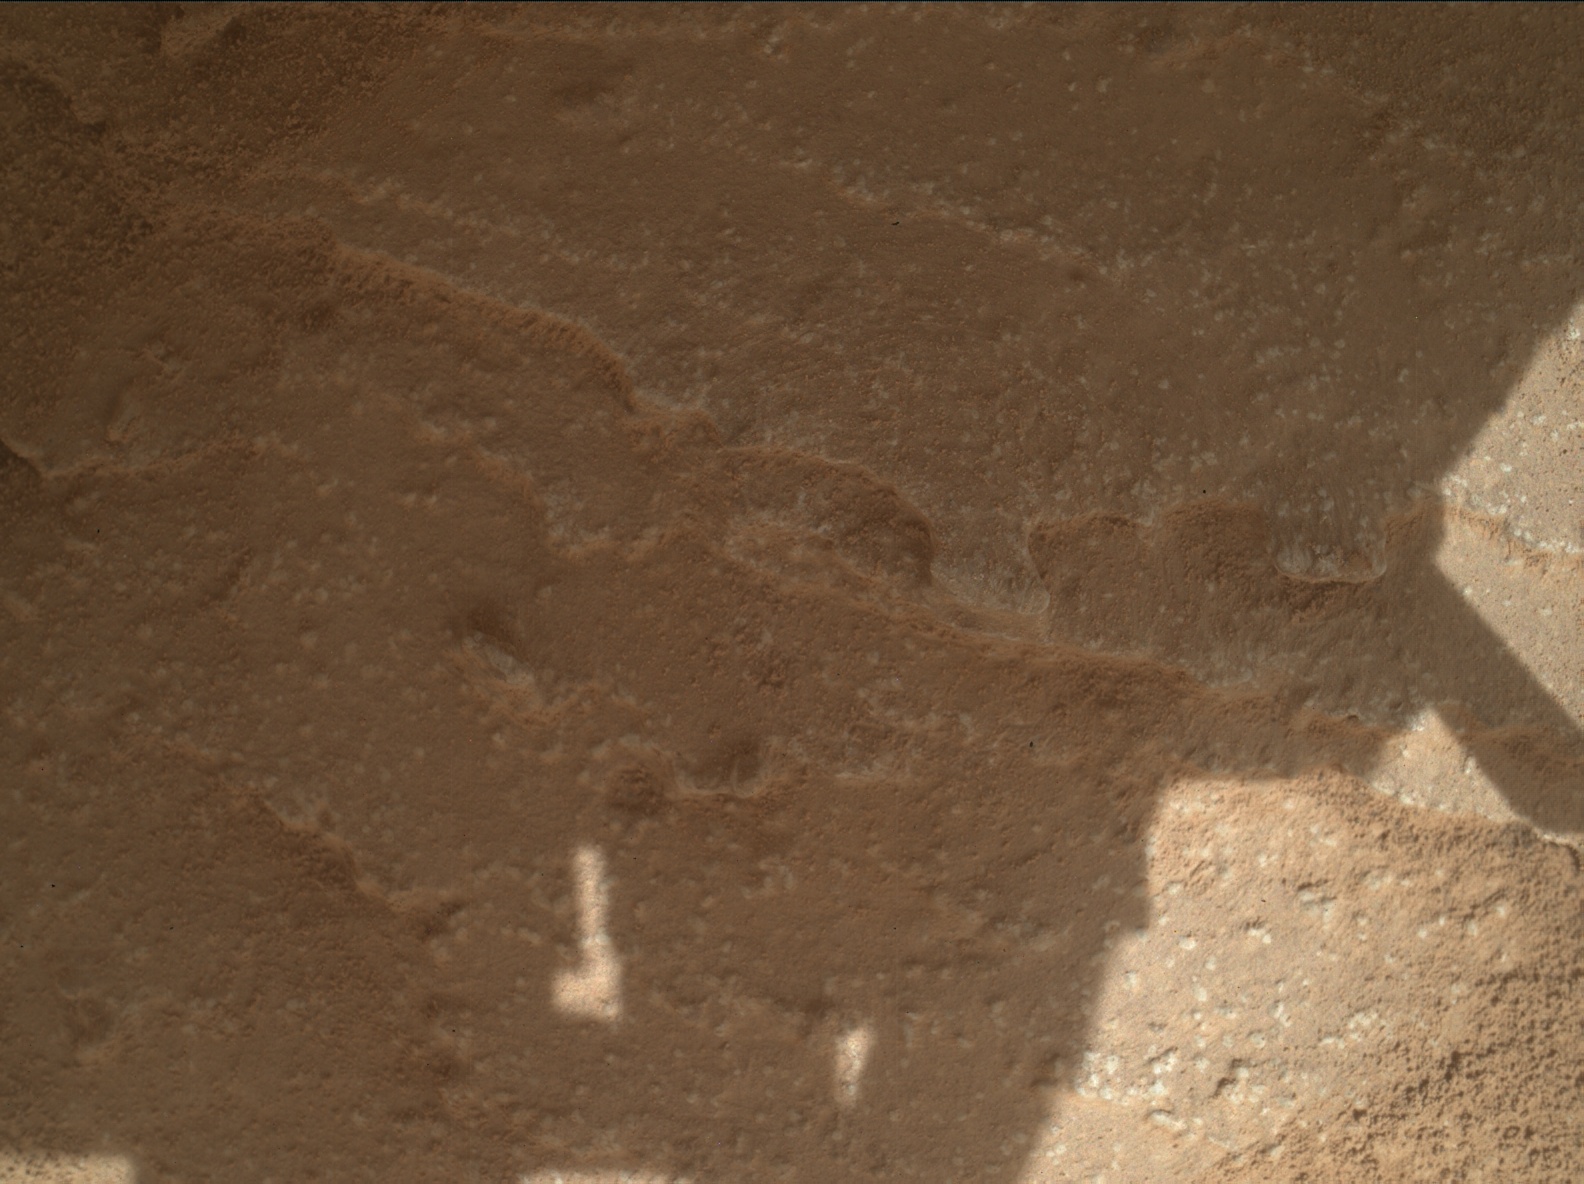 Nasa's Mars rover Curiosity acquired this image using its Mars Hand Lens Imager (MAHLI) on Sol 3887